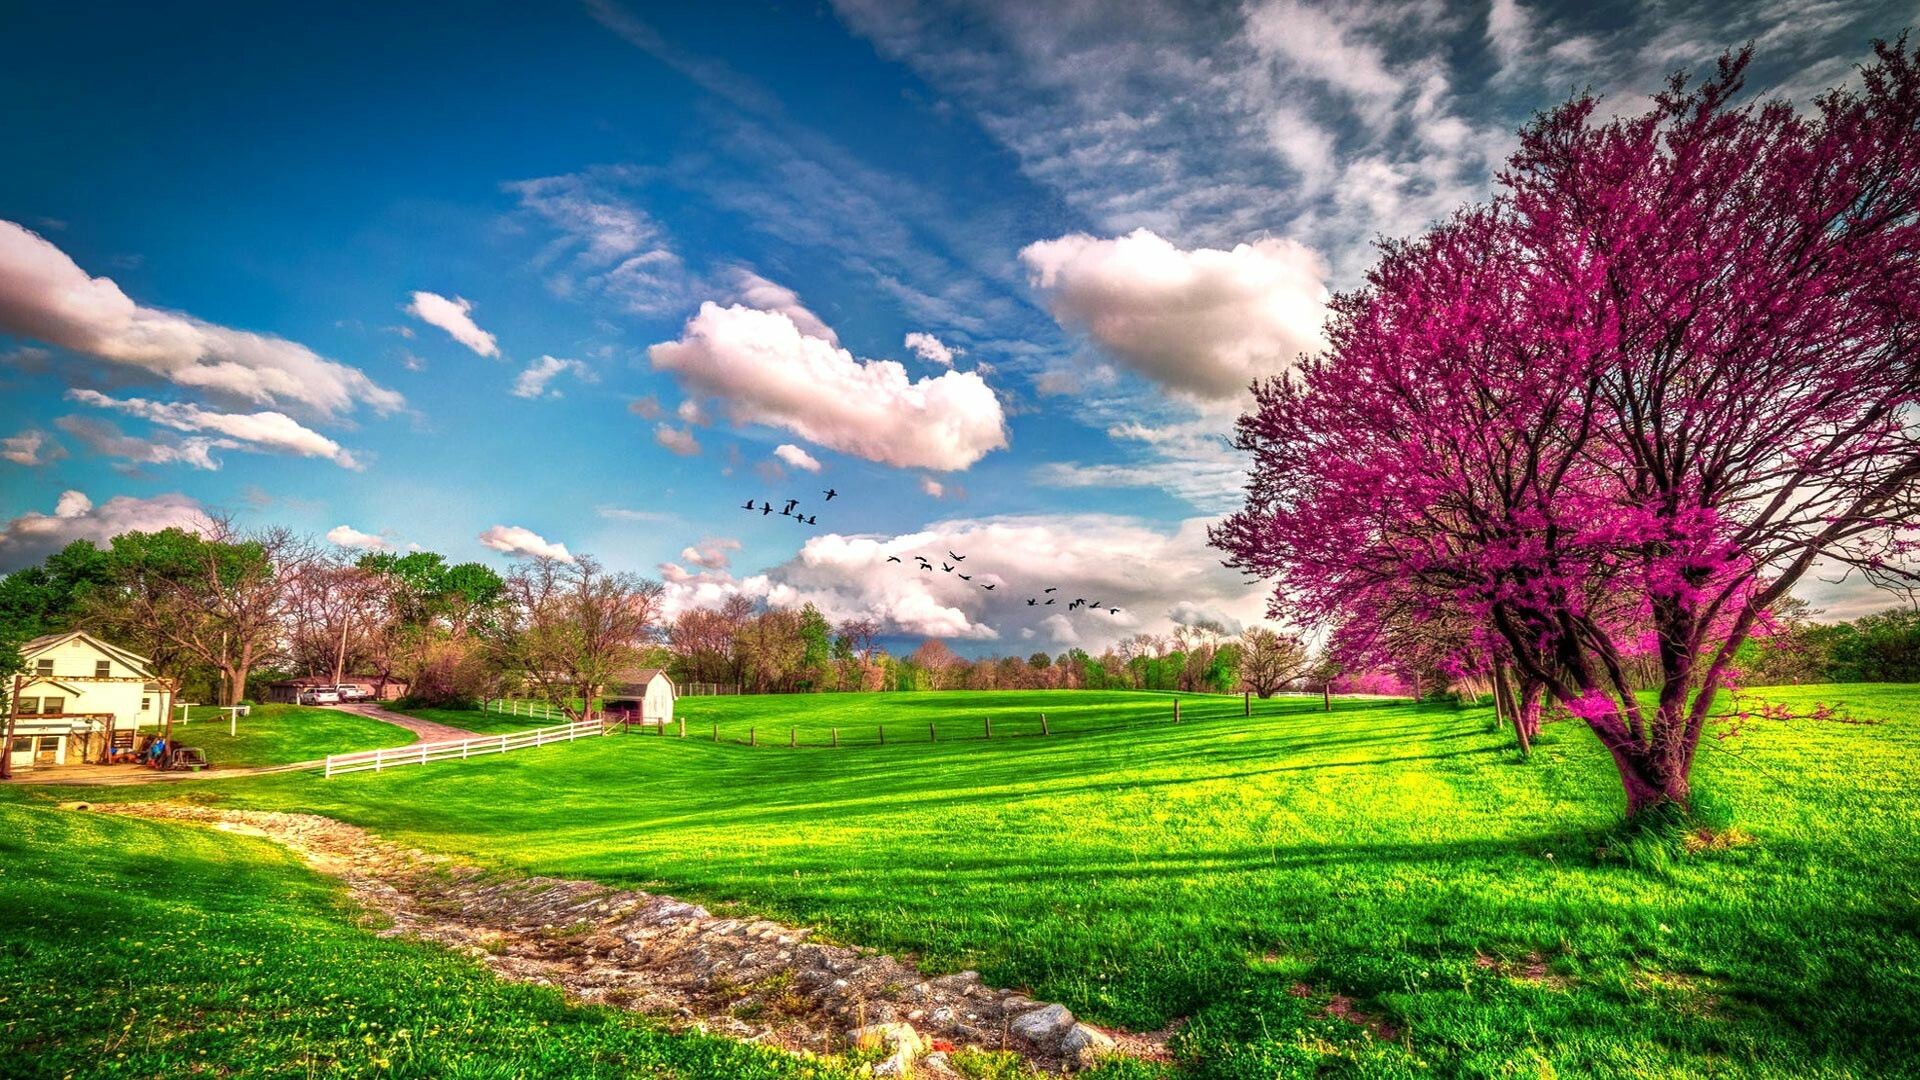 Spring: Nature, The season of rebirth, joy, love, and life, Vegetation. 1920x1080 Full HD Background.